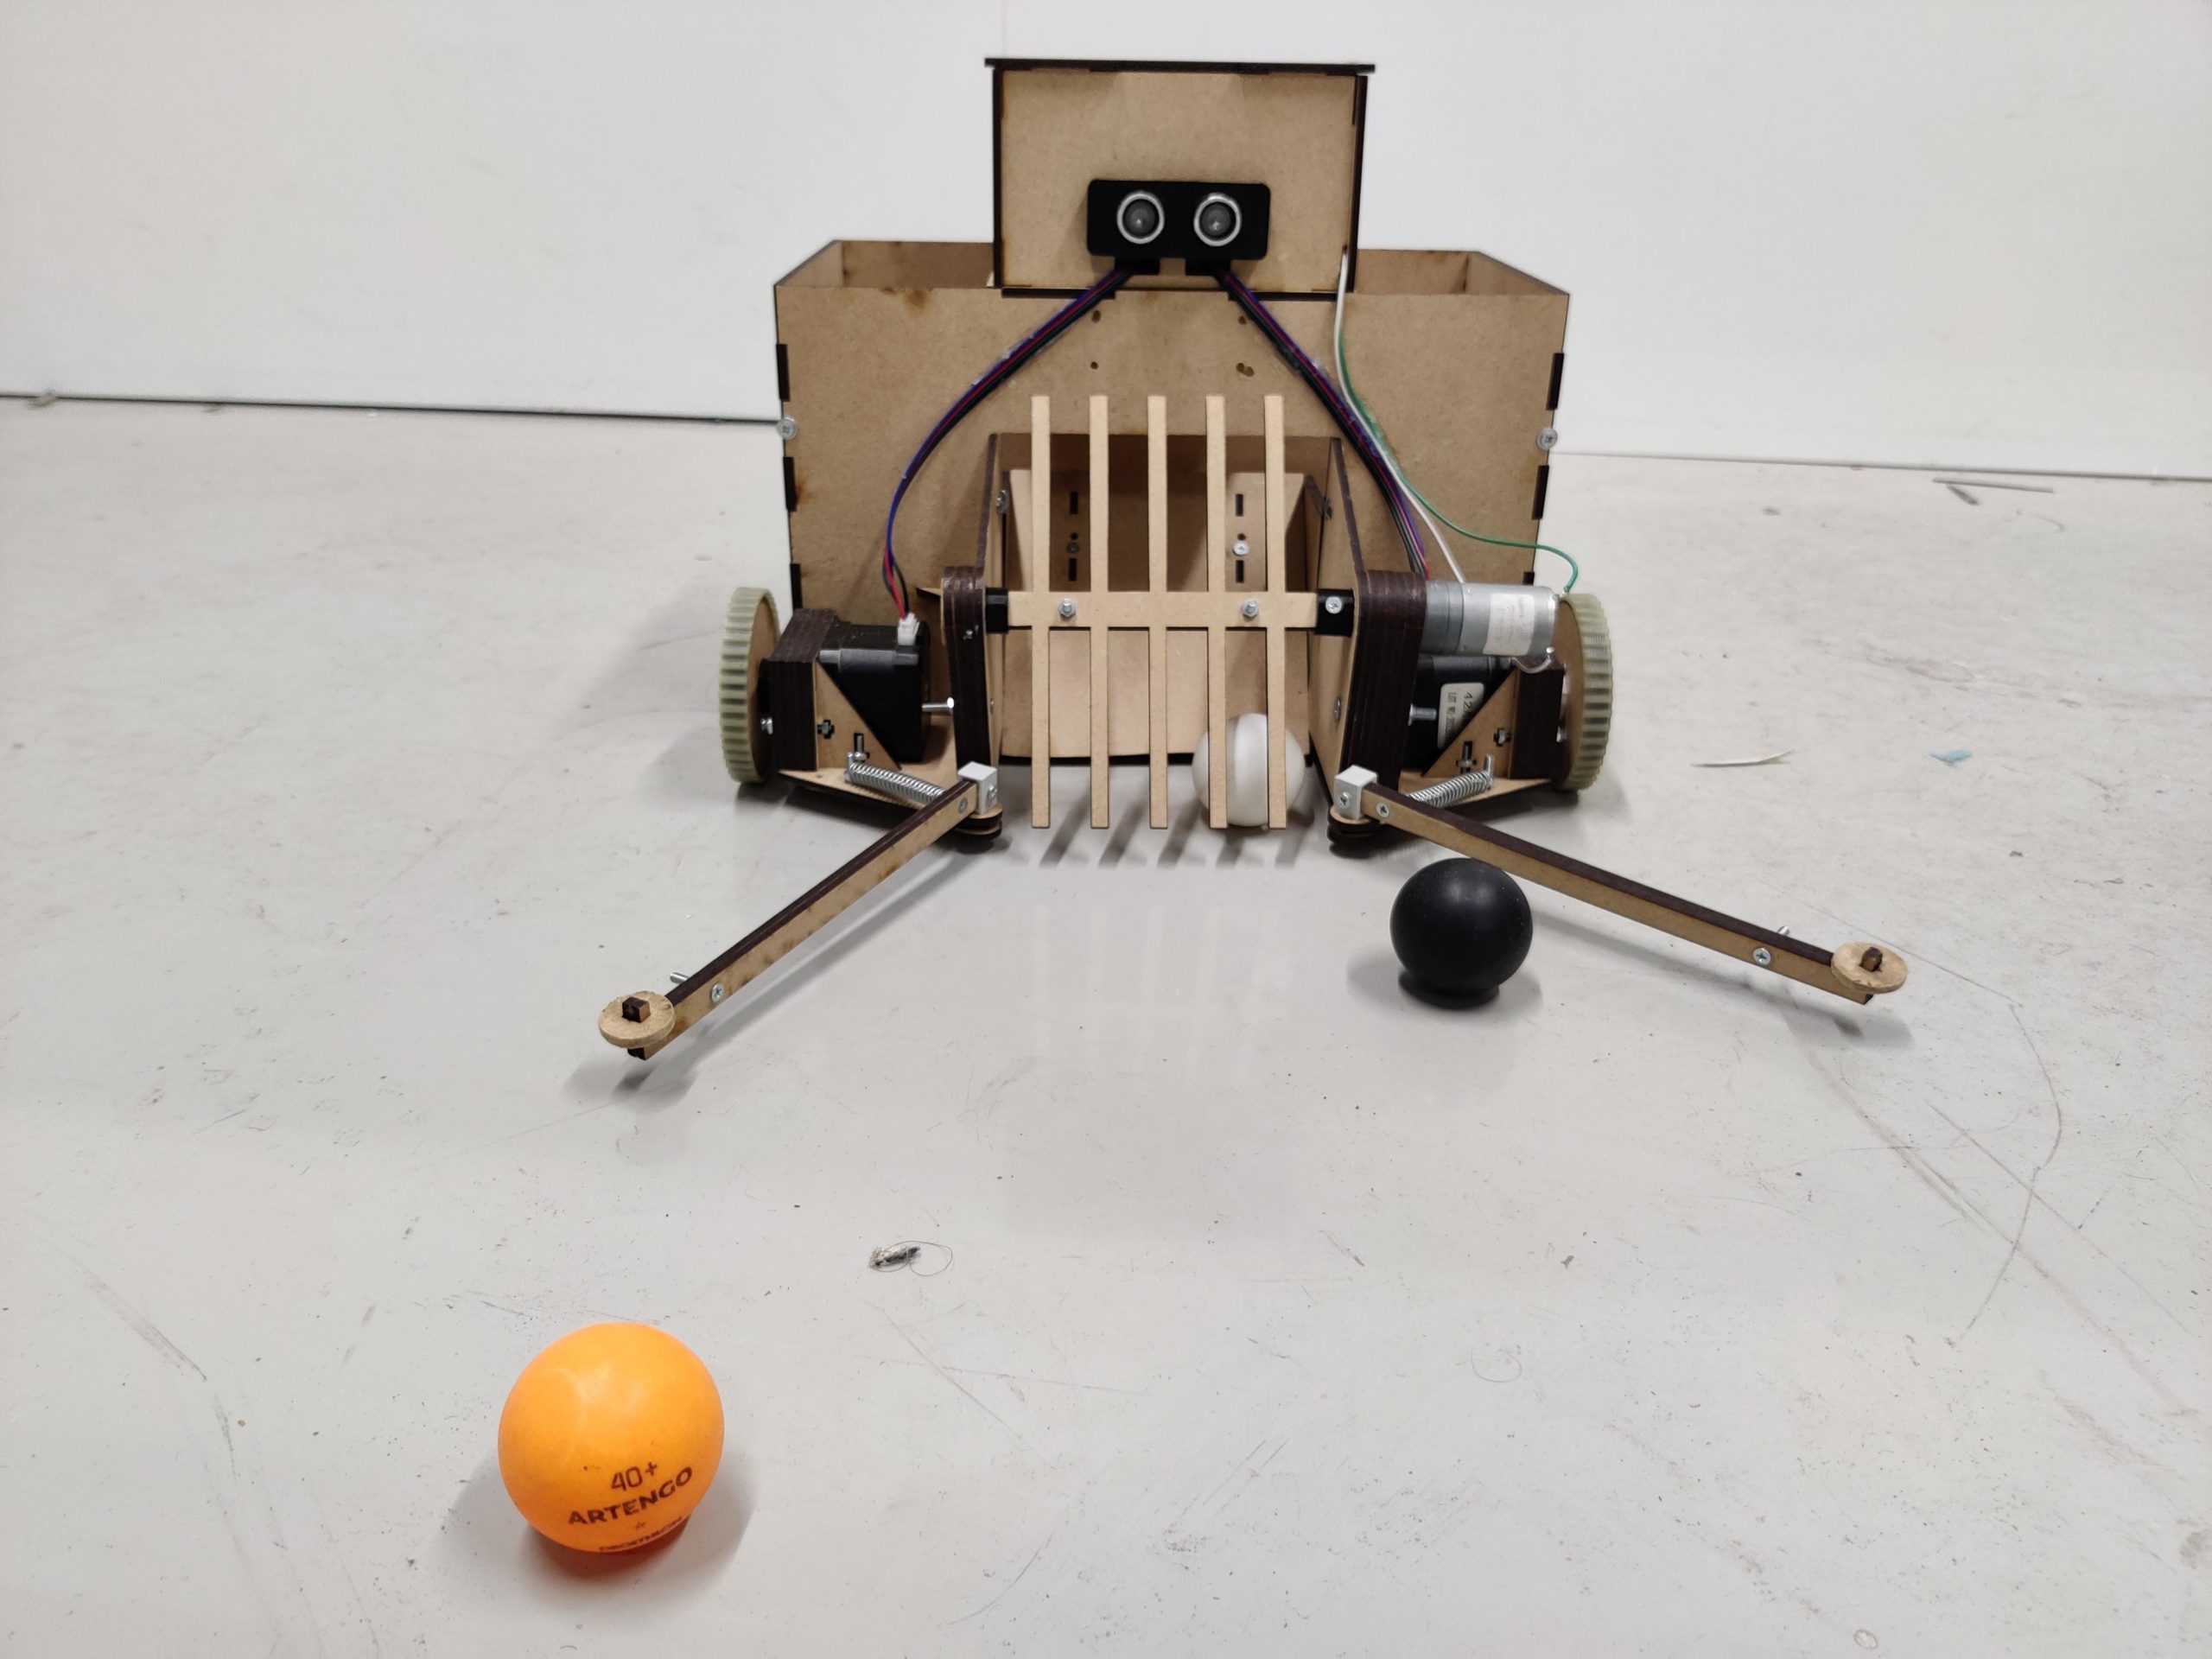 Robotic collects ping pong balls after matches